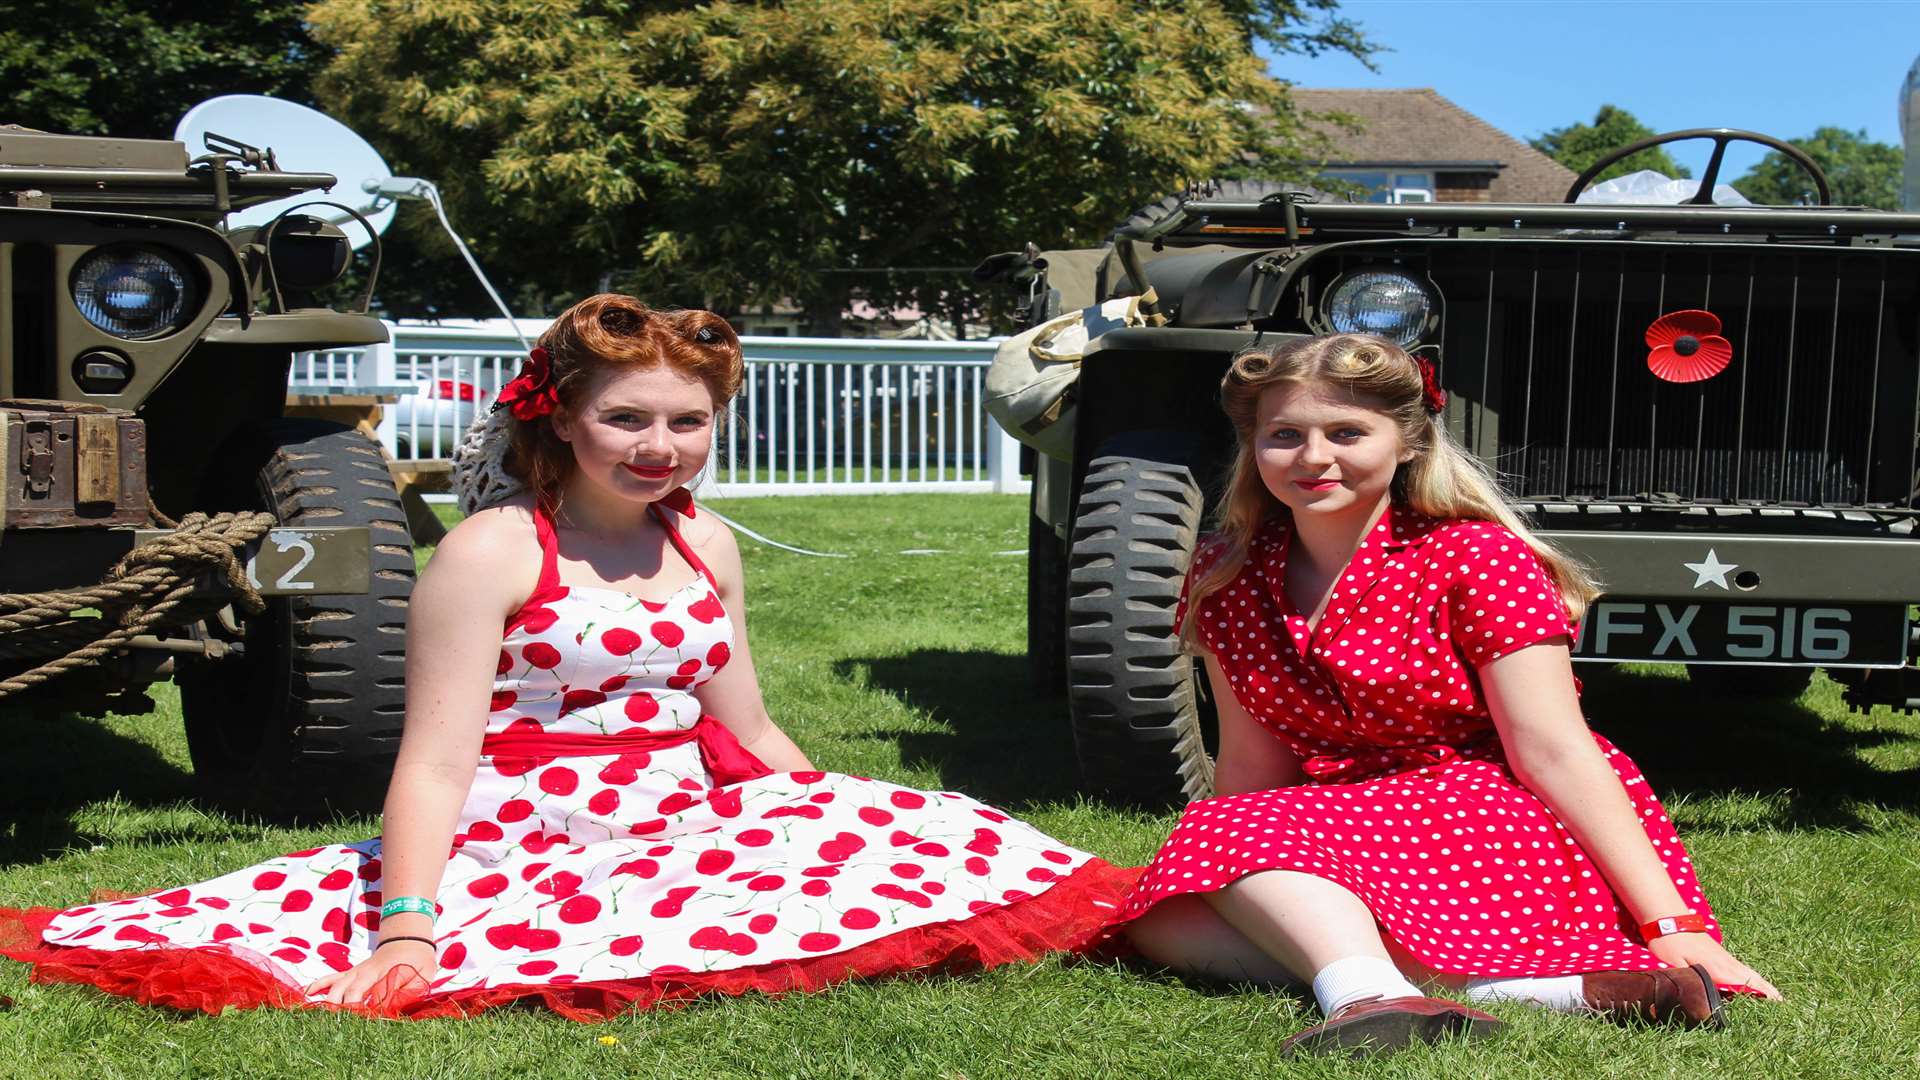 The War and Peace Revival takes place at the Hop Farm